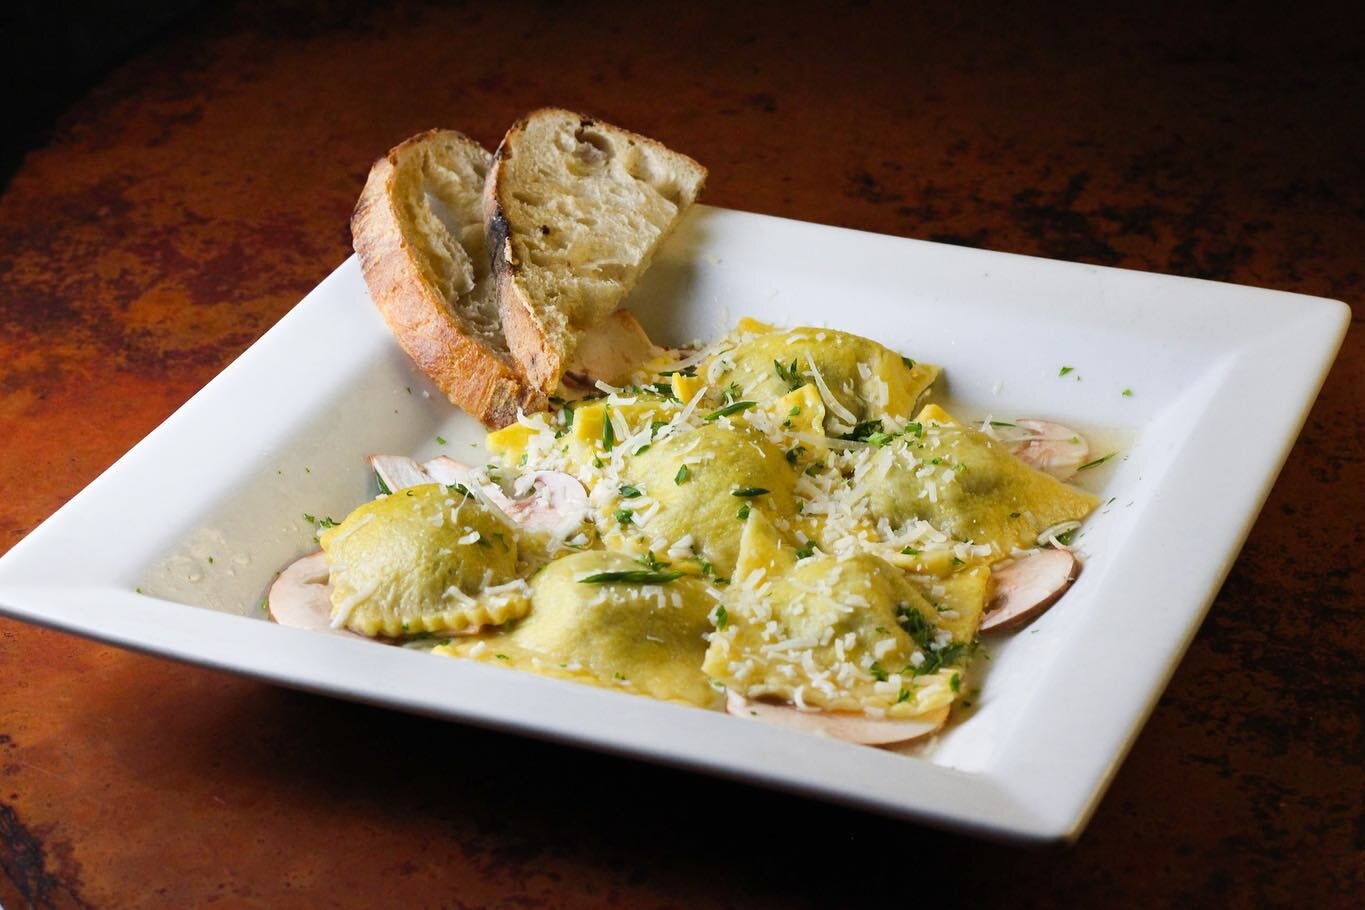 In honor of Saturday evening's "Night at the Opera" program, we've got a magnificent symphony of flavors awaiting you at the Beehive this weekend. 
Il PRIMO: House-made Ravioli stuffed with Mushrooms and Collard Greens in a light Garlic Herb and Chee